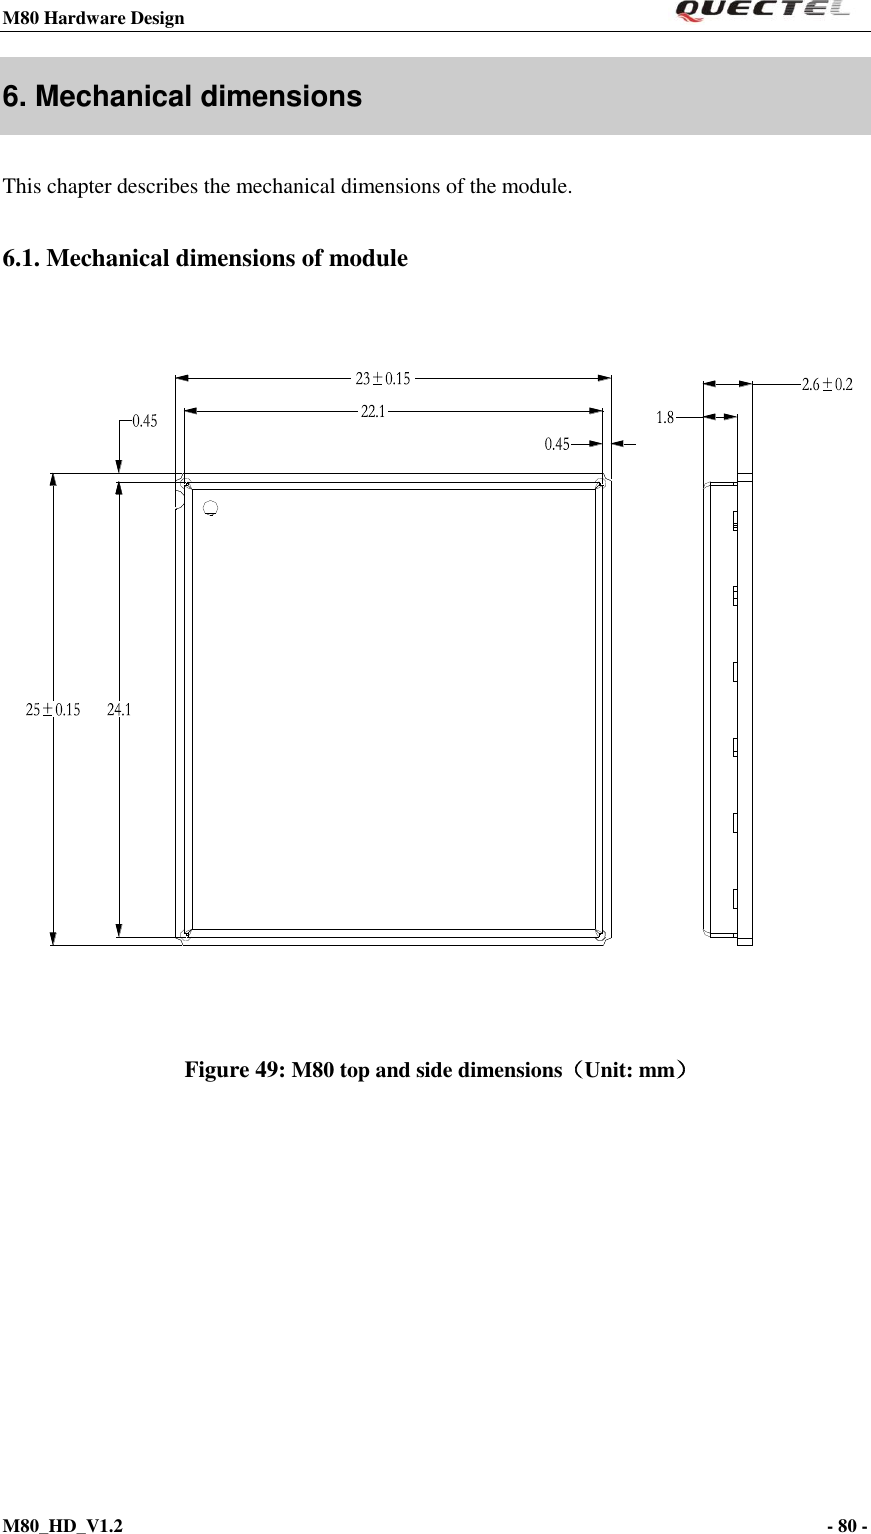 M80 Hardware Design                                                                M80_HD_V1.2                                                                                                                                        - 80 -    6. Mechanical dimensions This chapter describes the mechanical dimensions of the module. 6.1. Mechanical dimensions of module     Figure 49: M80 top and side dimensions（Unit: mm） 